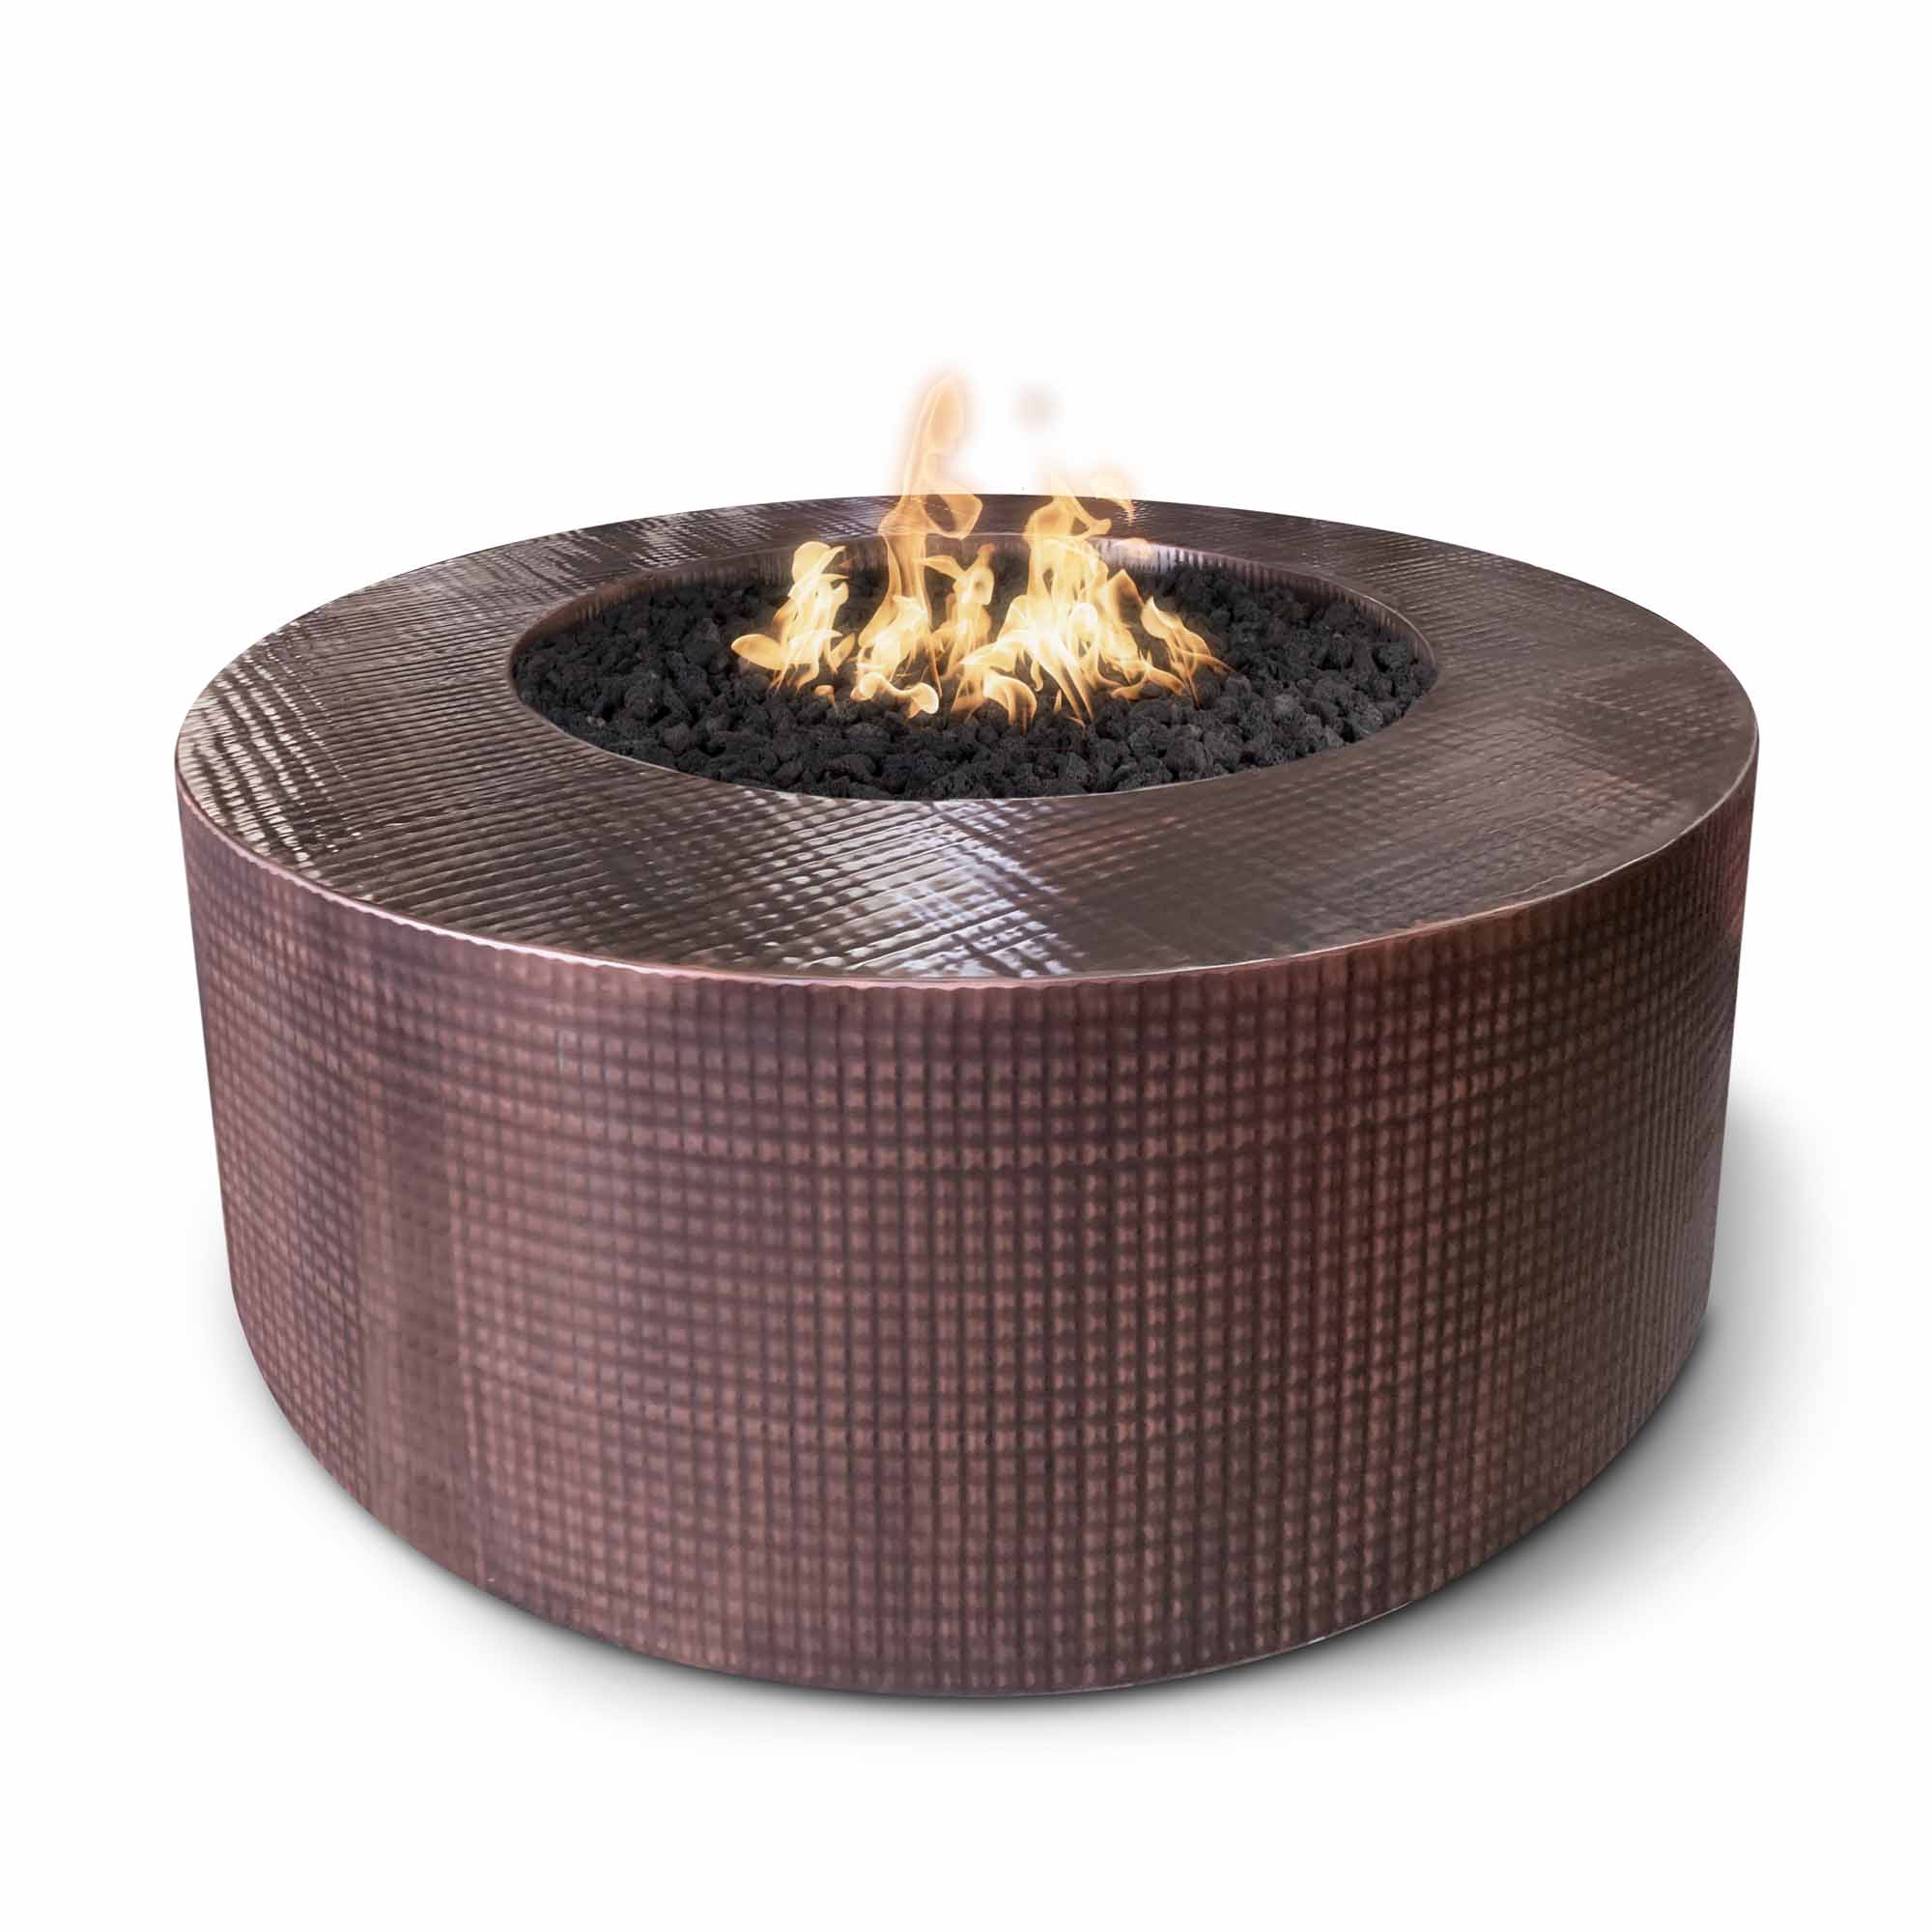 Unity Fire Pit 18 Tall The Outdoor, Copper Fire Pit Table